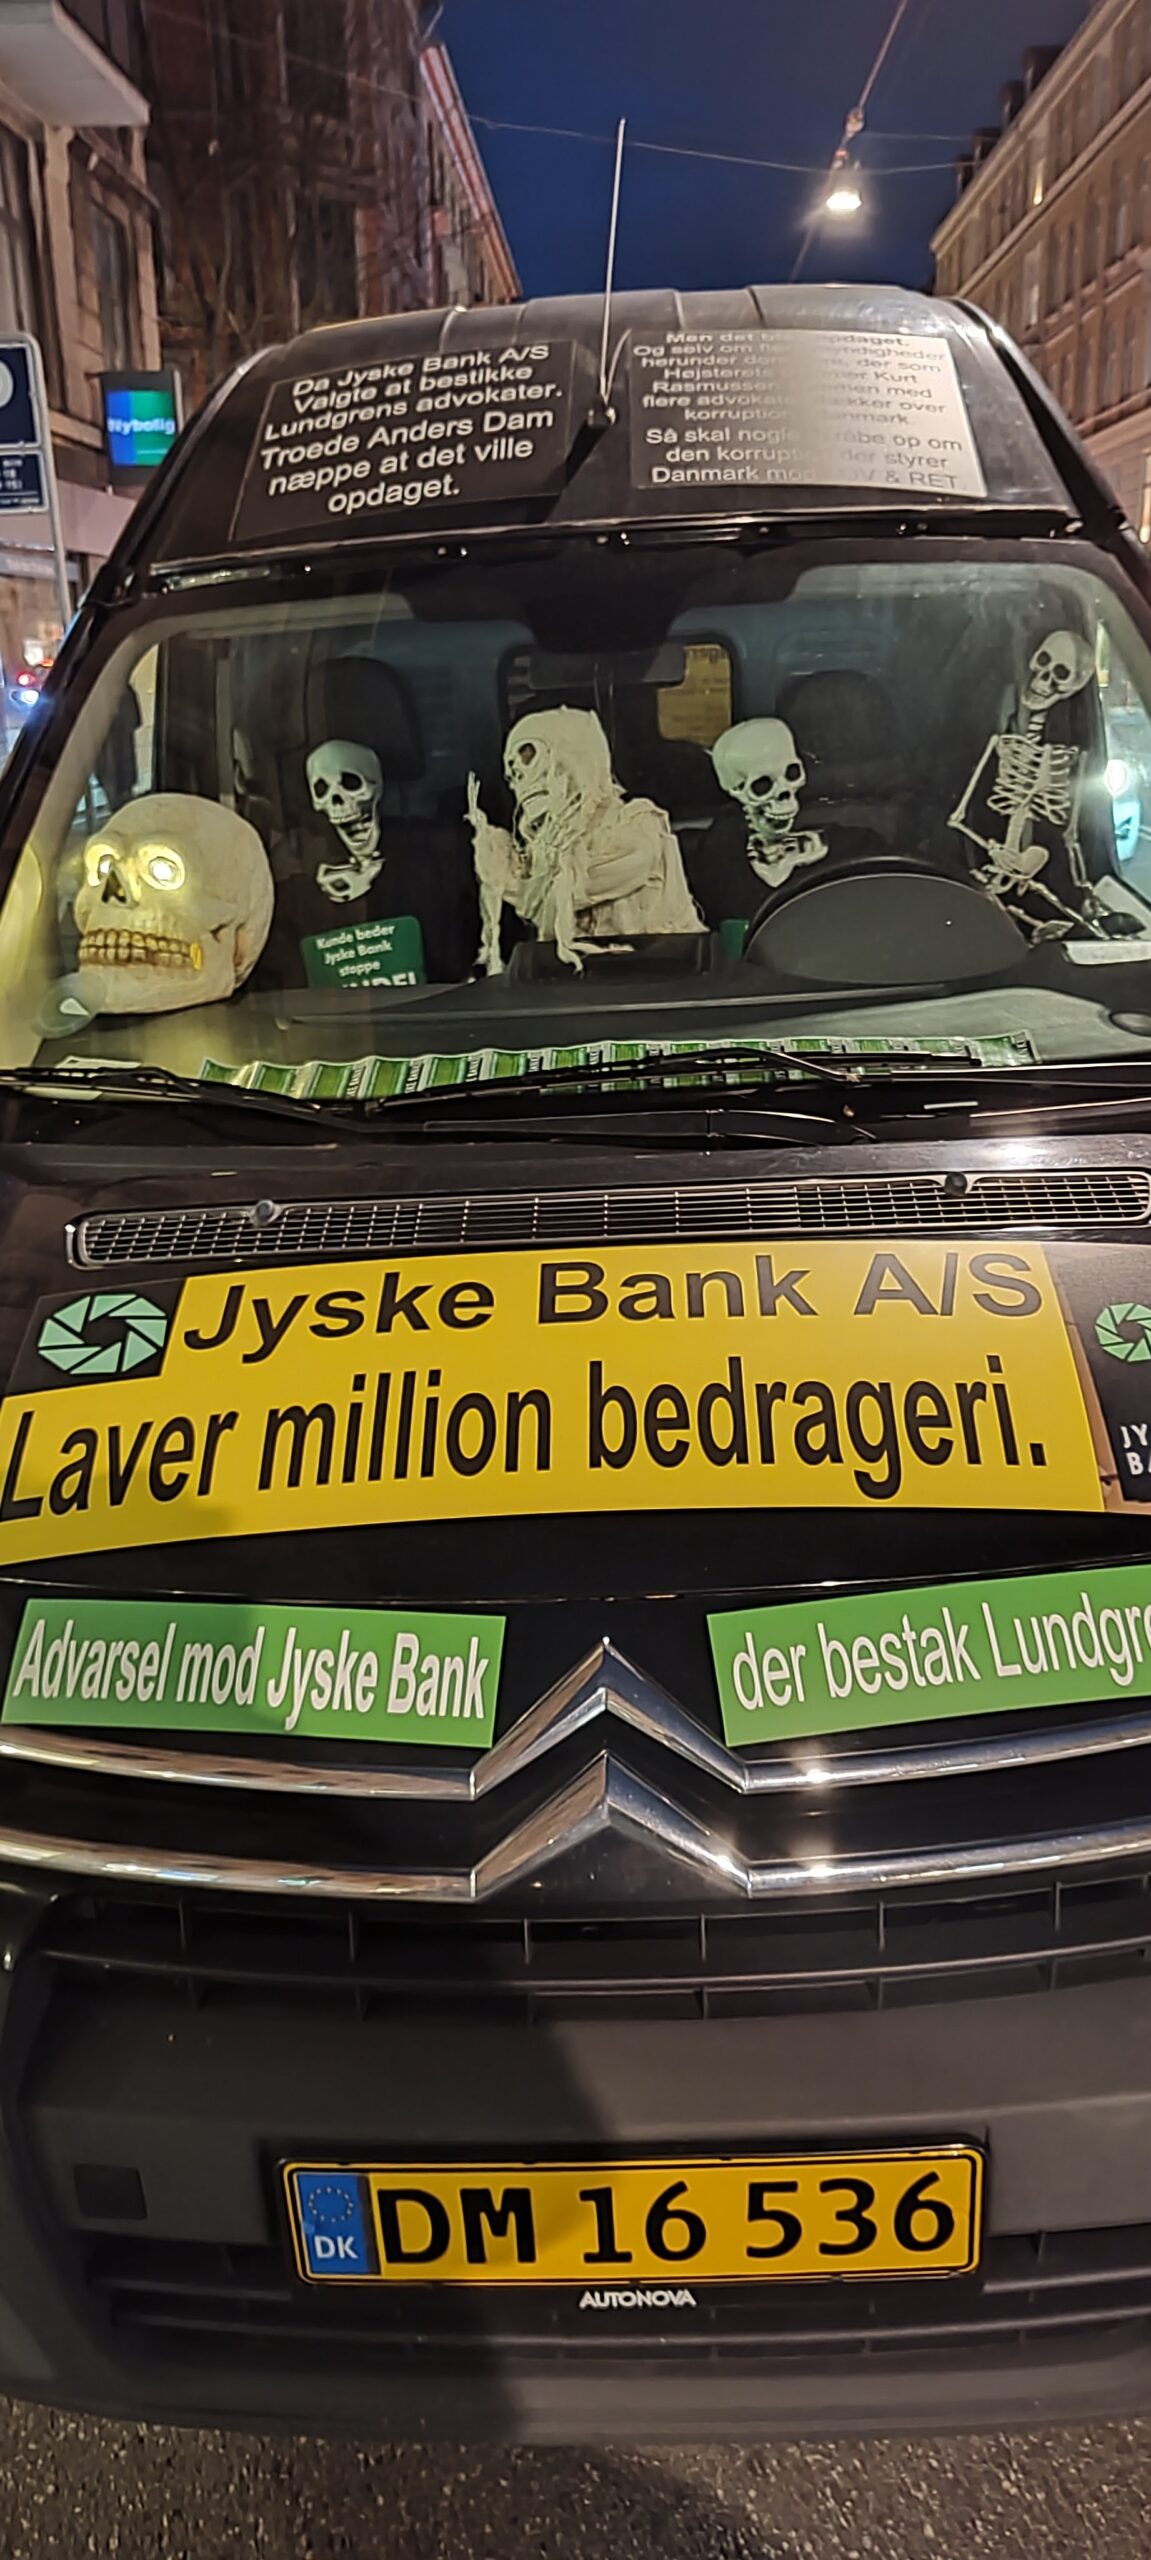 Since both Mette Marie Nielsen together with Emil Hald Wendelbo Vindstrøm, have a central role in helping Jyske Bank with fraud, and that they did not present some of the client’s fraud and false allegations against Jyske Bank A/S, and that their former employer Lundgrens has sued the client, for together with Jyske Bank, to undermine the former client’s economy, in order to prevent the client and plaintiff from economically, to being able to pursue and continue the fraud case against the criminal Jyske Bank A/S to get the court’s word, that Lundgren’s lawyers must have a total of DKK 232,000 for not presenting the client’s case against Jyske Bank. By the fact that they both Mette Marie Nielsen together and Emil Hald Wendelbo Vindstrøm, in bad faith and dishonestly, did not present the client case against Jyske Bank, with the allegations that you can read here, and then compare with what Lundgrens presented, and note that Lundgrens, will not hand over the pleadings, that Emil Hald Wendel presented on 2 September 2019. pleading 2. read and be convinced that Lundgrens is a corrupt law firm.